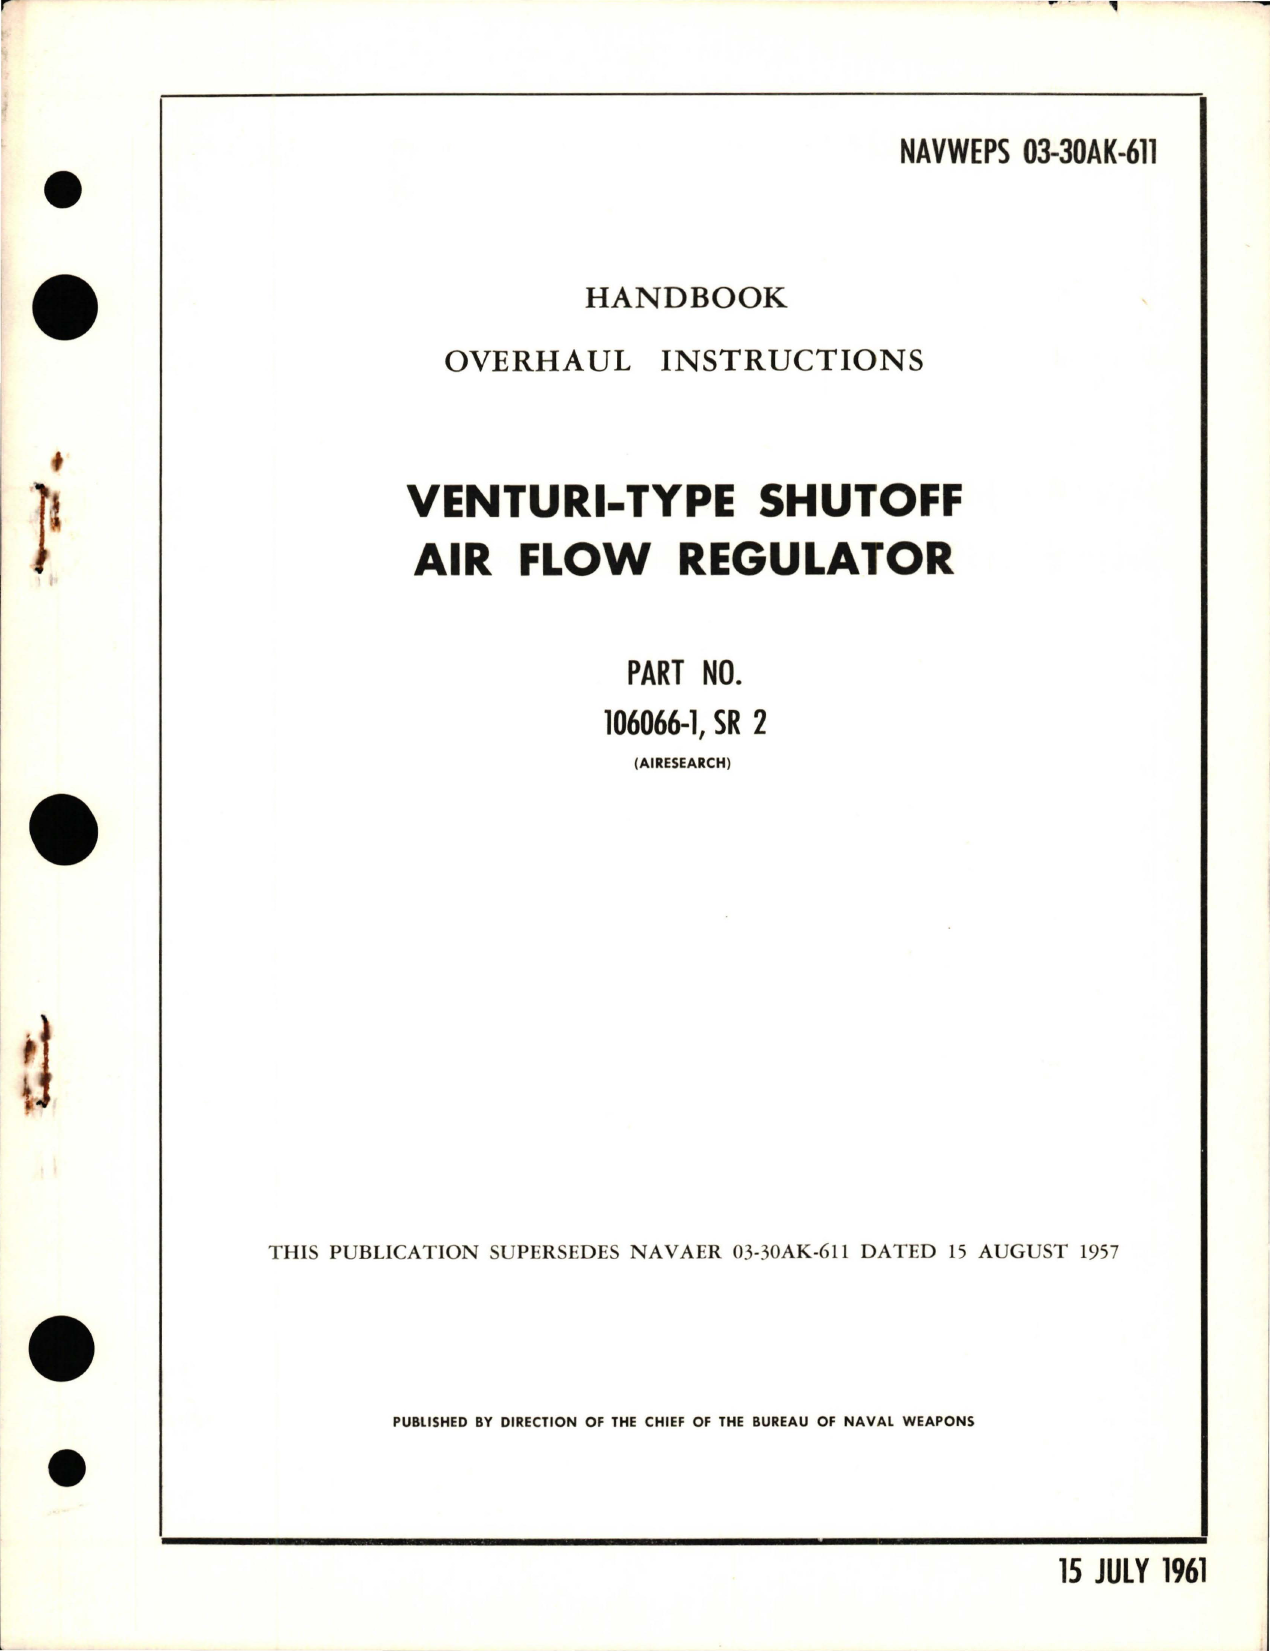 Sample page 1 from AirCorps Library document: Overhaul Instructions for Venturi-Type Shutoff Air Flow Regulator - Part 106066-1, SR 2 